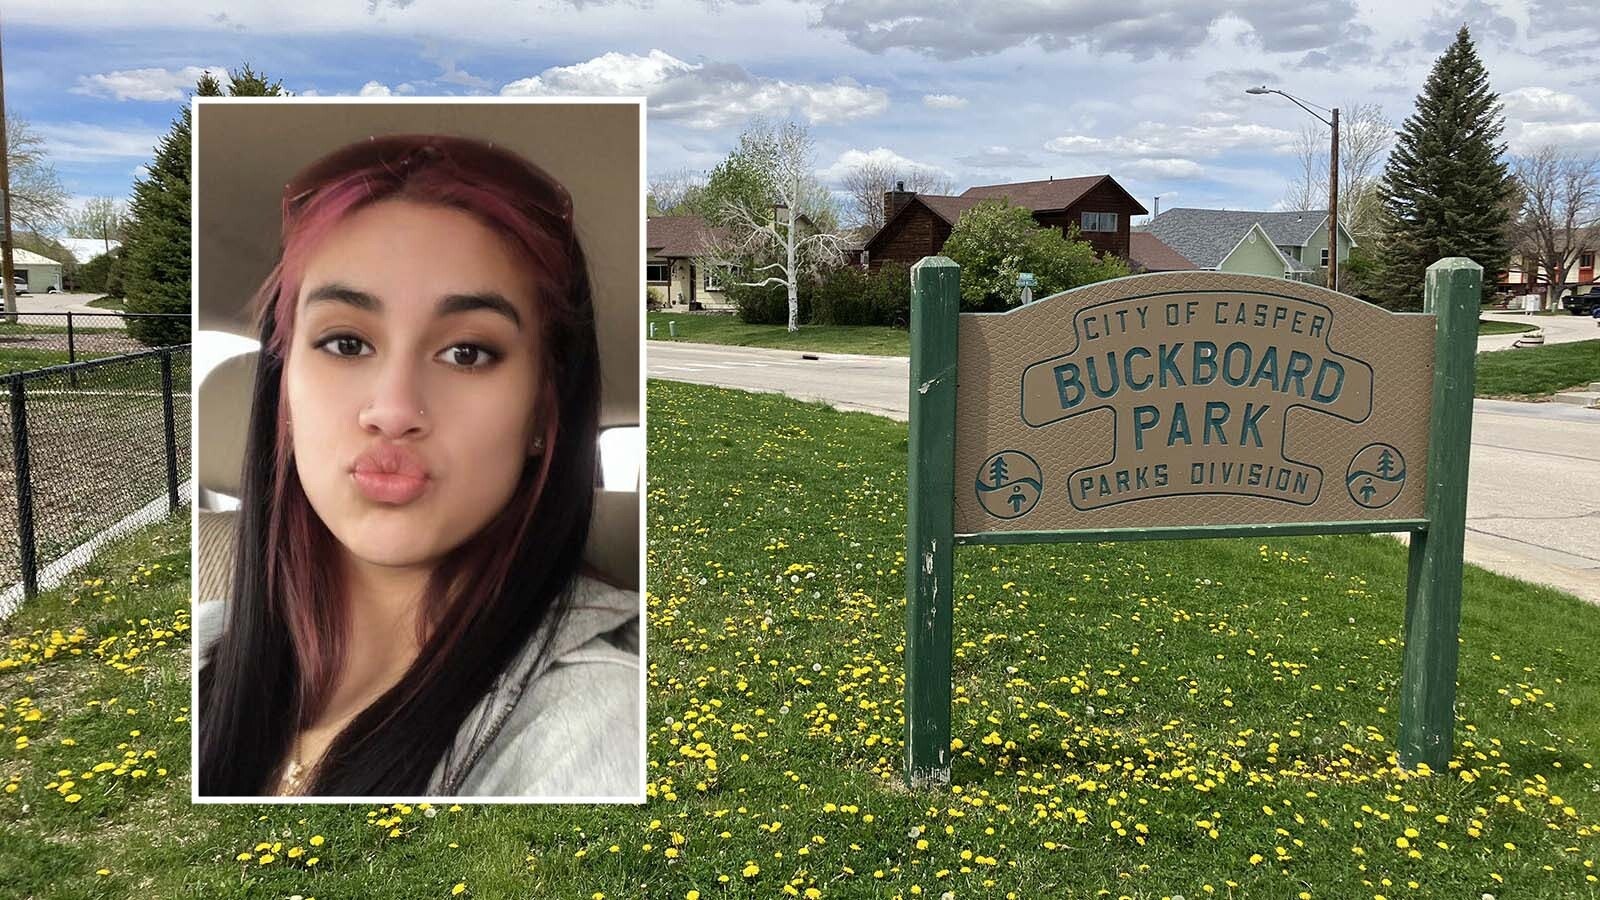 Lenea Brown, 17, of Casper was shot in the head and killed near Buckboard Park on May 14. Her ex-boyfriend, Eavan Castaner, has been charged as an adult with first-degree murder.